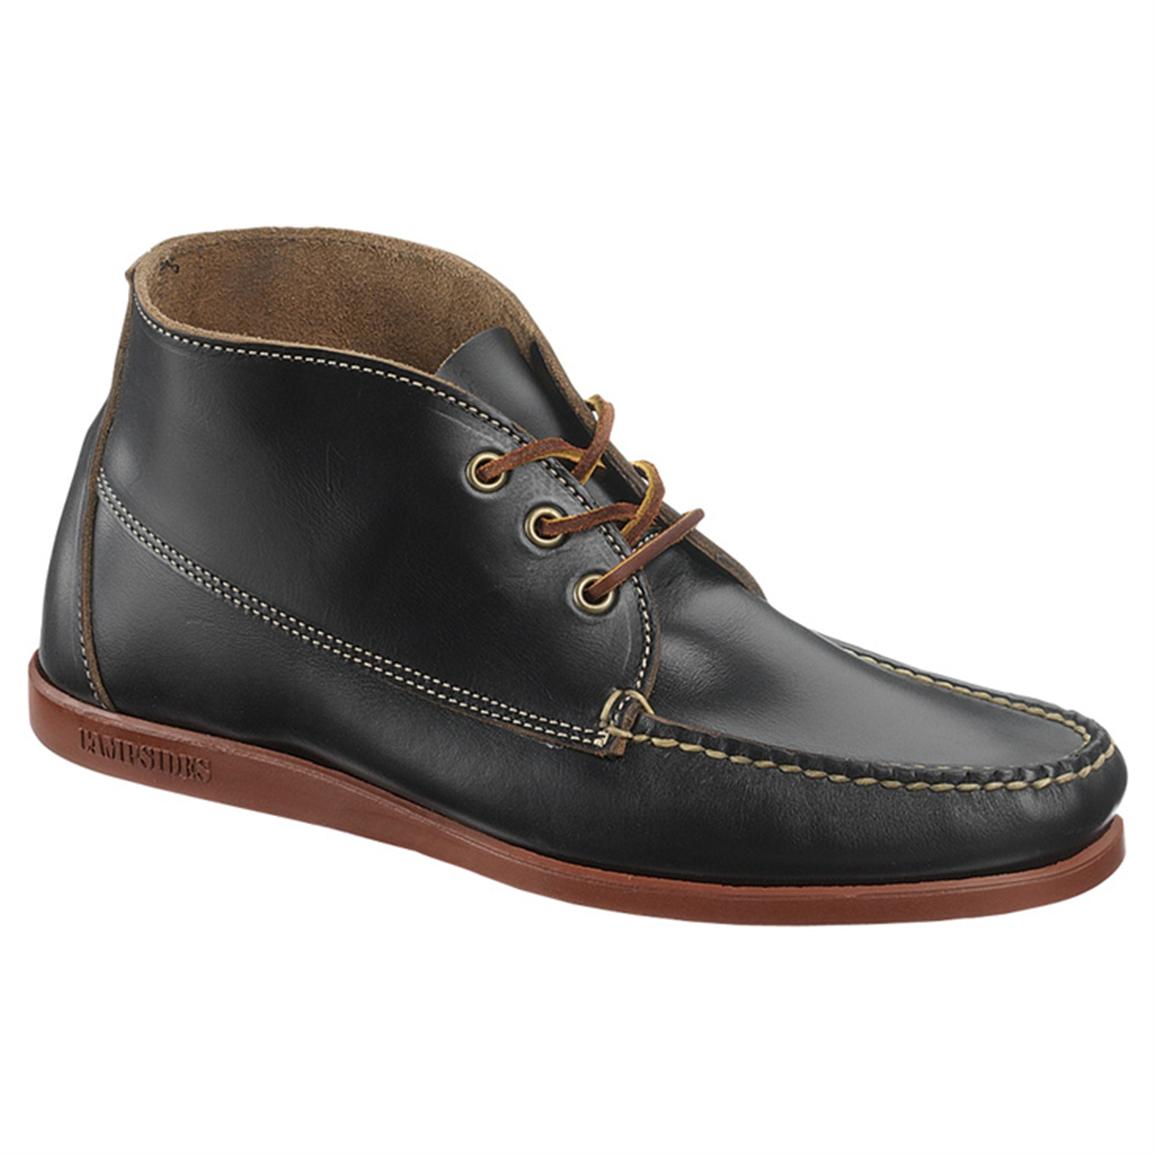 Men's Campsides™ Chukka Boots - 582512, Casual Shoes at Sportsman's Guide